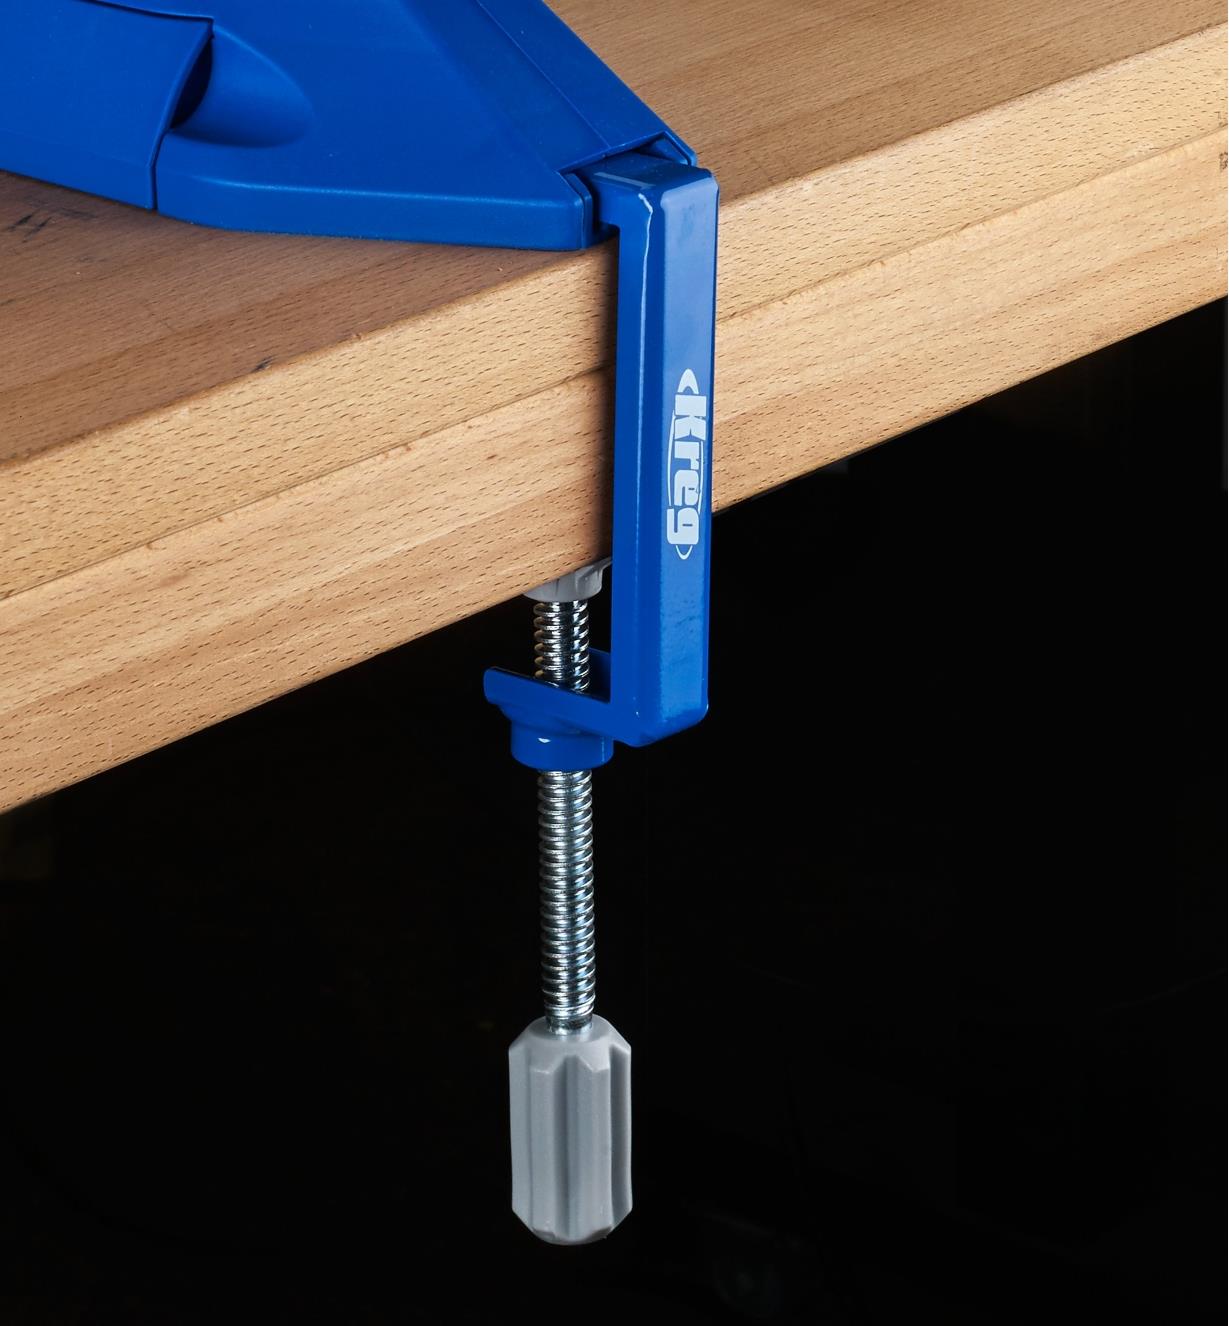 A close view of the included table clamp used to secure the Kreg jig docking station to a workbench